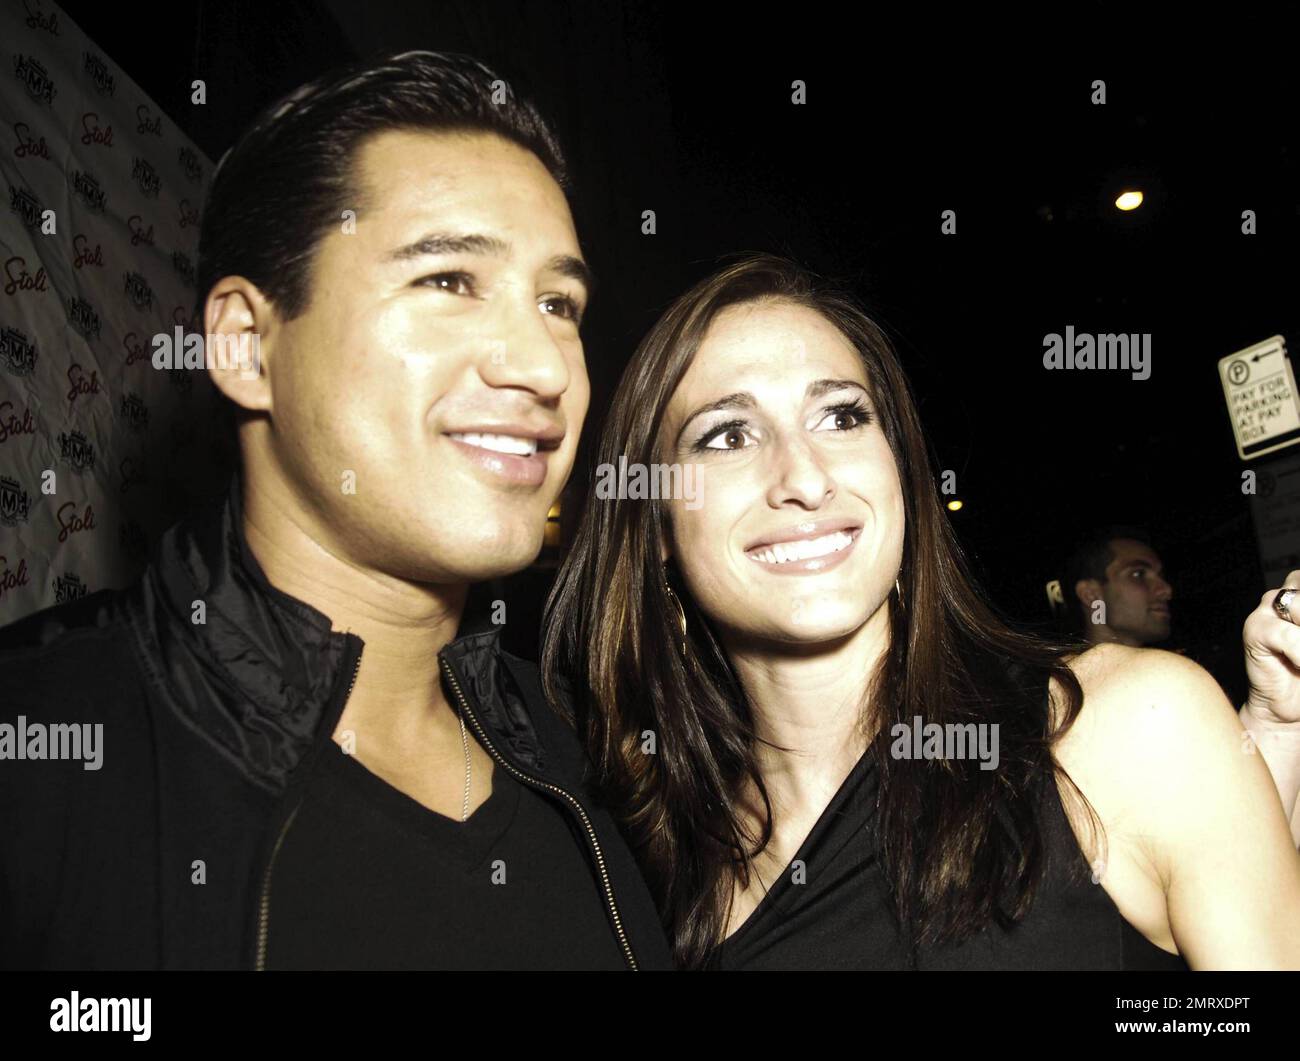 Extra! host and new dad Mario Lopez makes an appearance at The Manor  nightclub the evening after helping kick off the 2010 Men's Health  Urbanathlon at Grant Park. Lopez and girlfriend Courtney Mazza welcomed  their first daughter, Gia Francesca ...